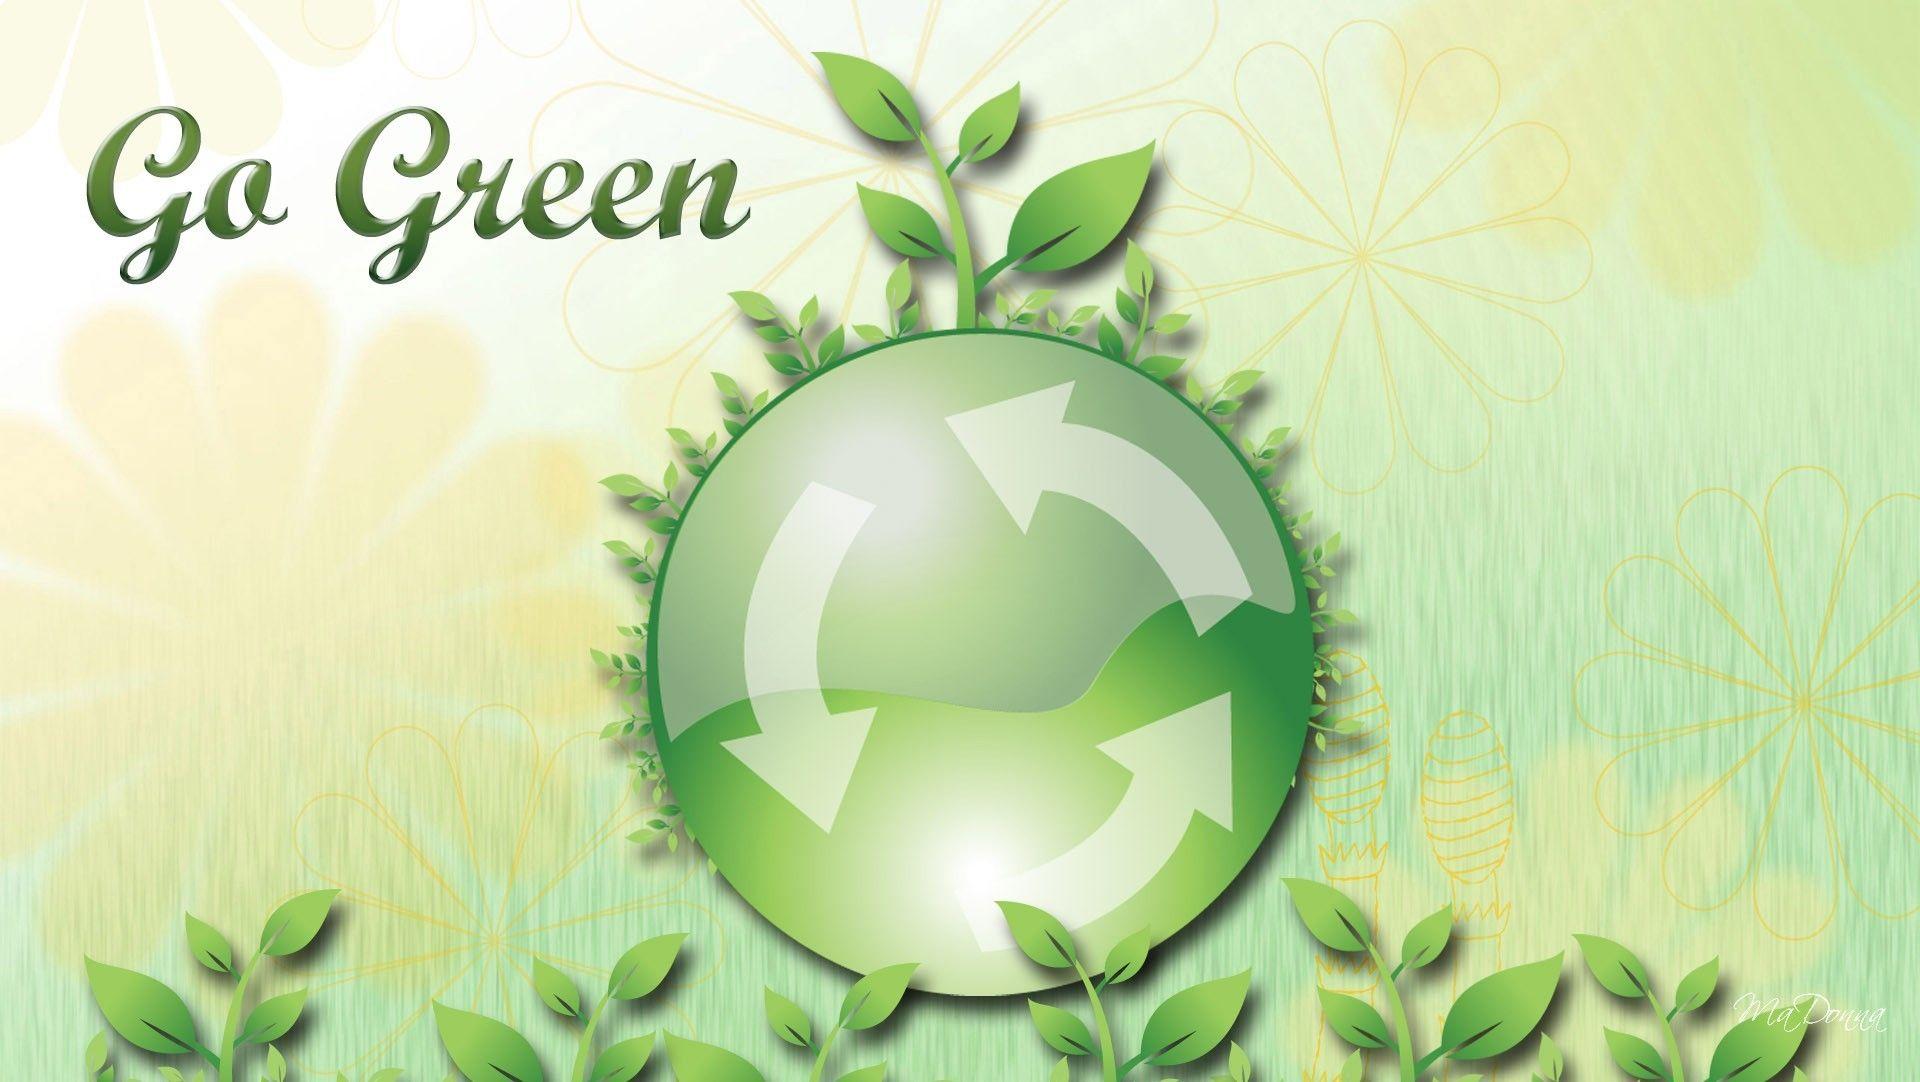 Misc: Green Recycle Firefox Persona Earth Spring Clean Ecology